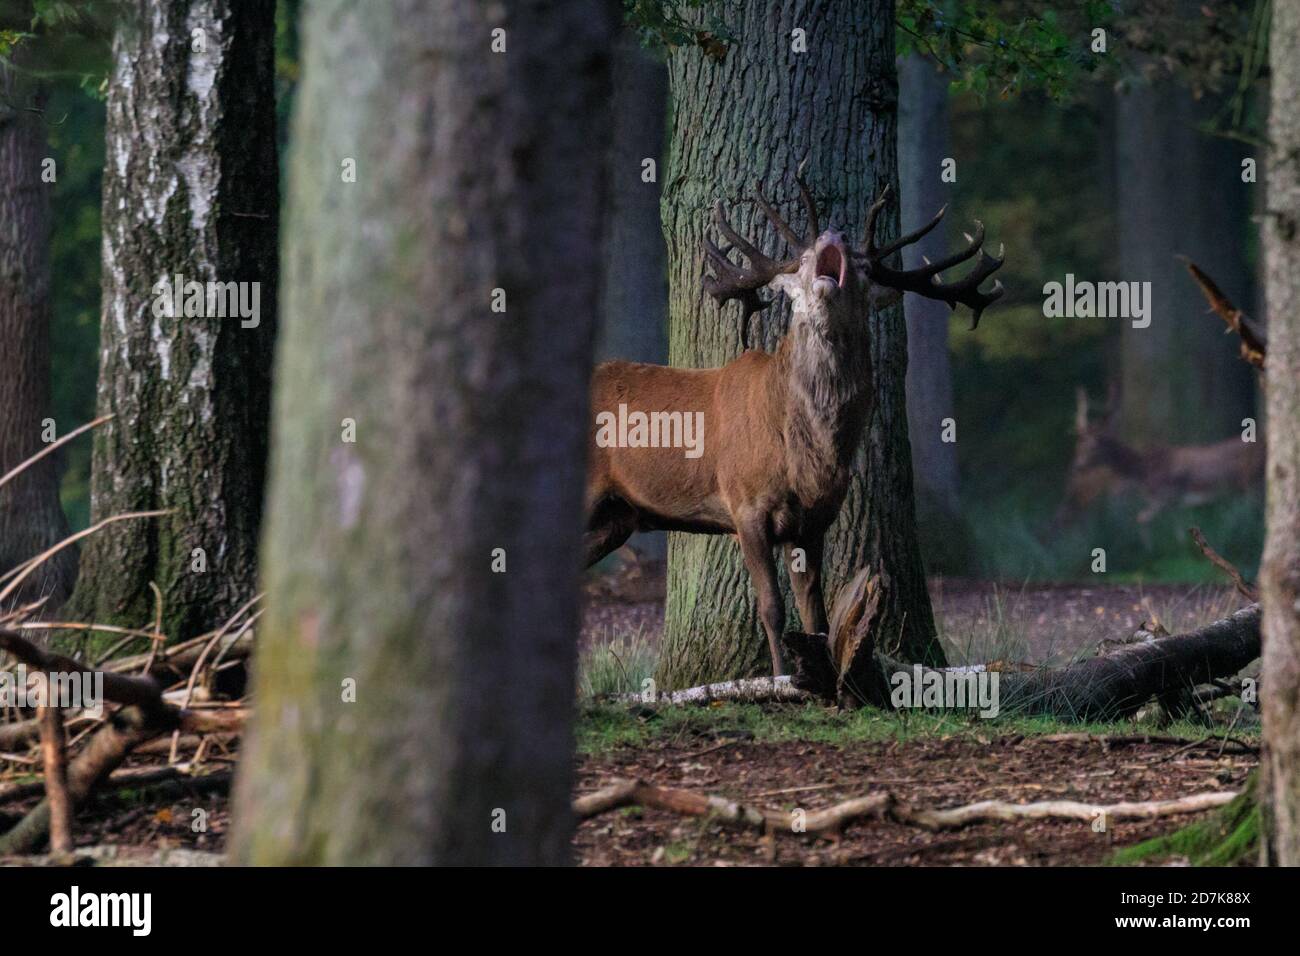 Duelmen, Muensterland, Germany. 23rd Oct, 2020. A red deer stag (cervus elaphus) with impressive antlers bellows and roars in woodland. The deer rutting season is fully under way with both red and fallow deer males at Duelmen nature reserve establishing their dominance and ranking. Credit: Imageplotter/Alamy Live News Stock Photo